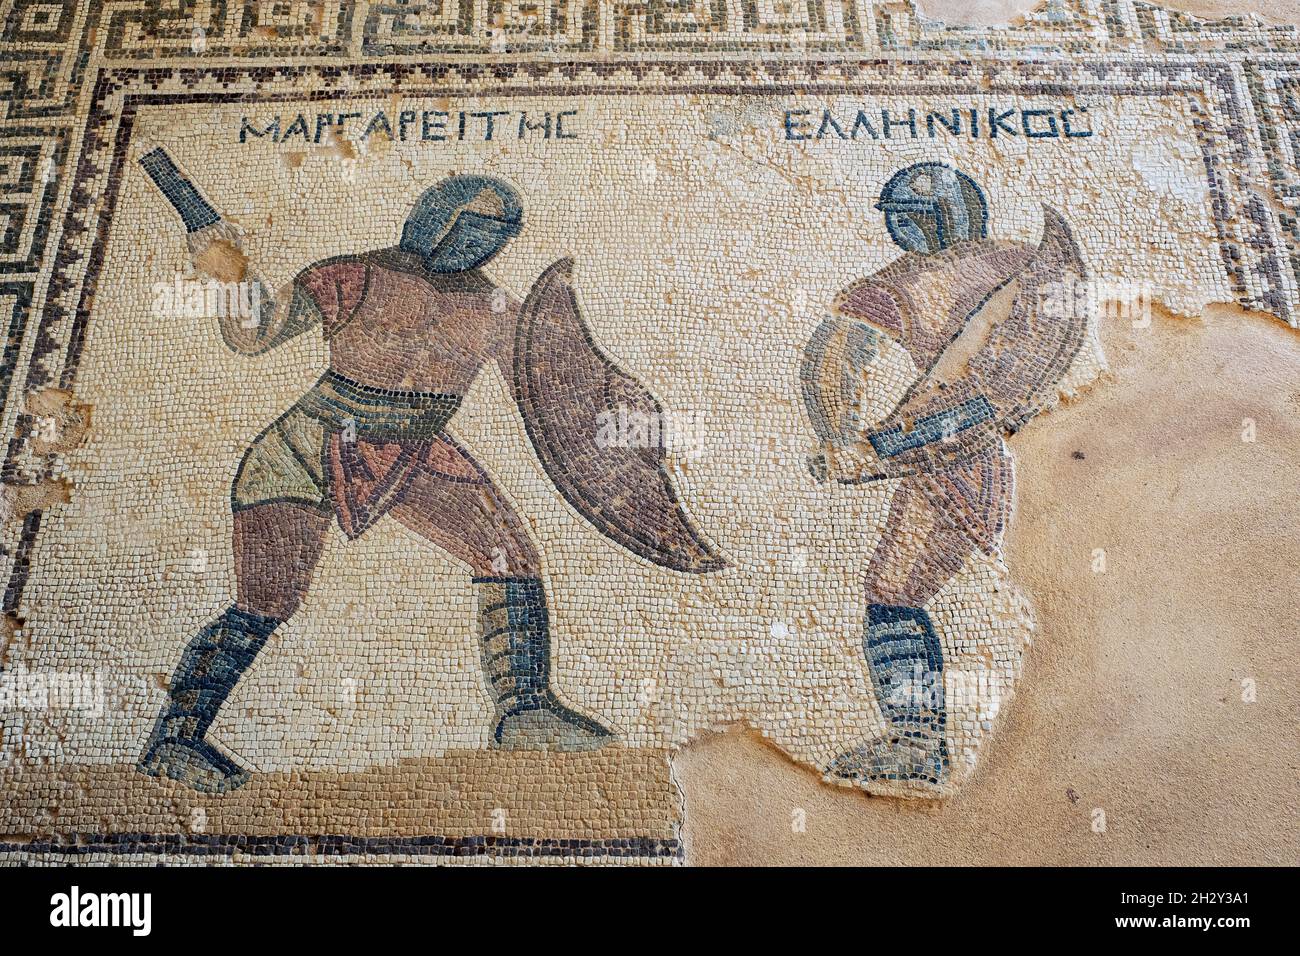 Gladiator mosaic in the Gladiators House, at the Archaeological site of Kourion, Republic of Cyprus. Stock Photo